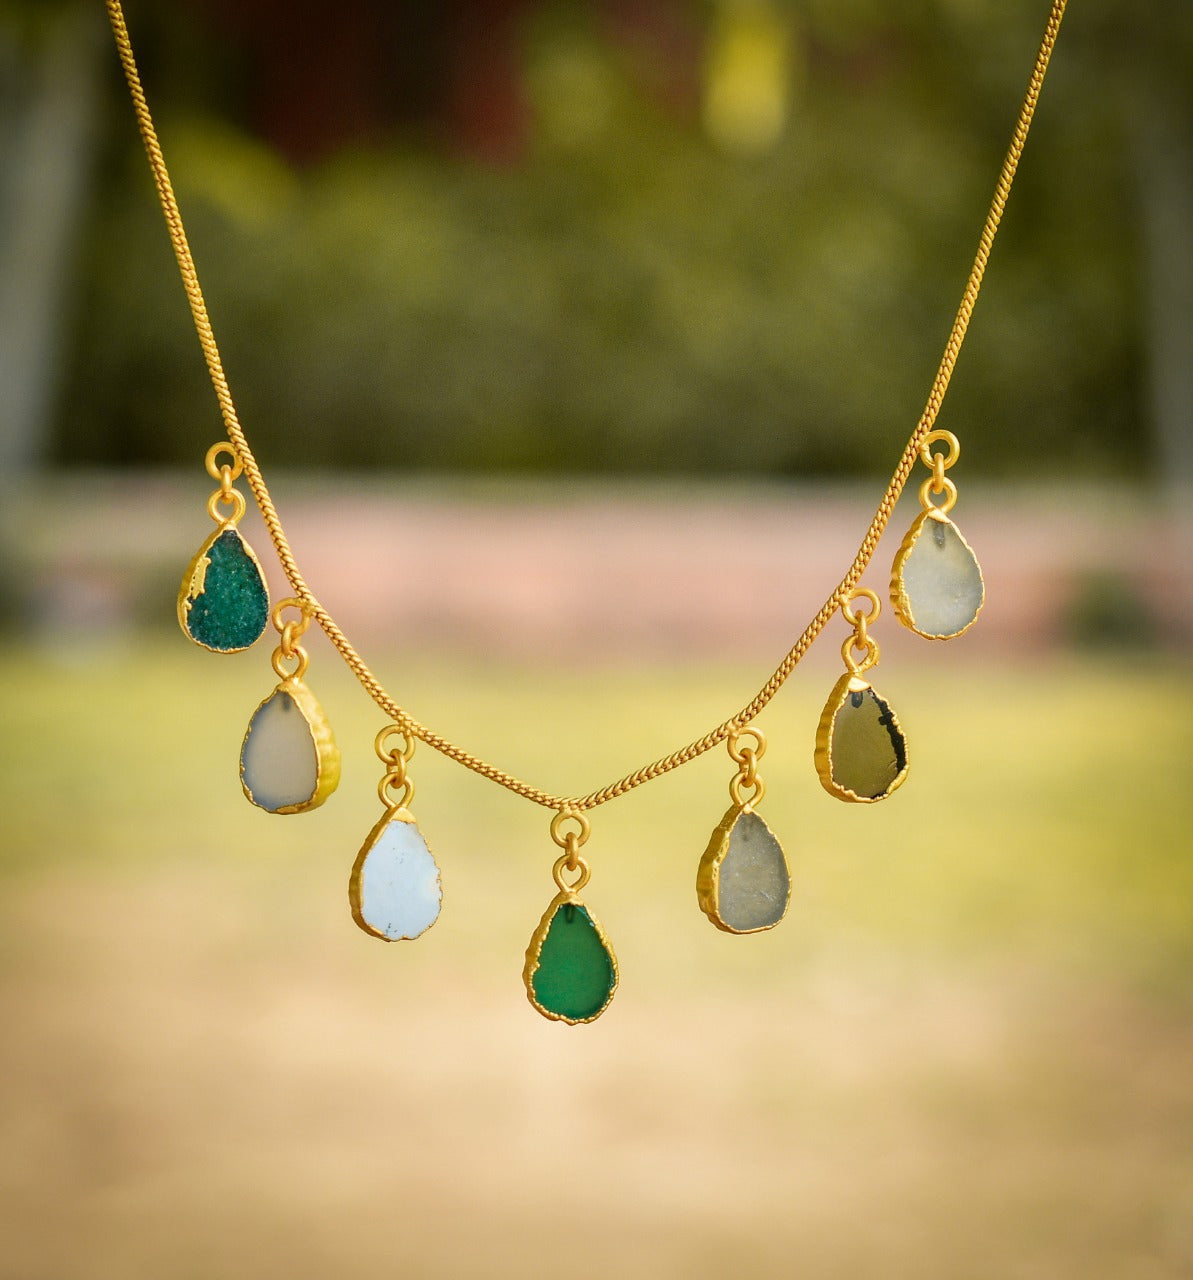 Druzy Drops Gold Filled Chain Necklace